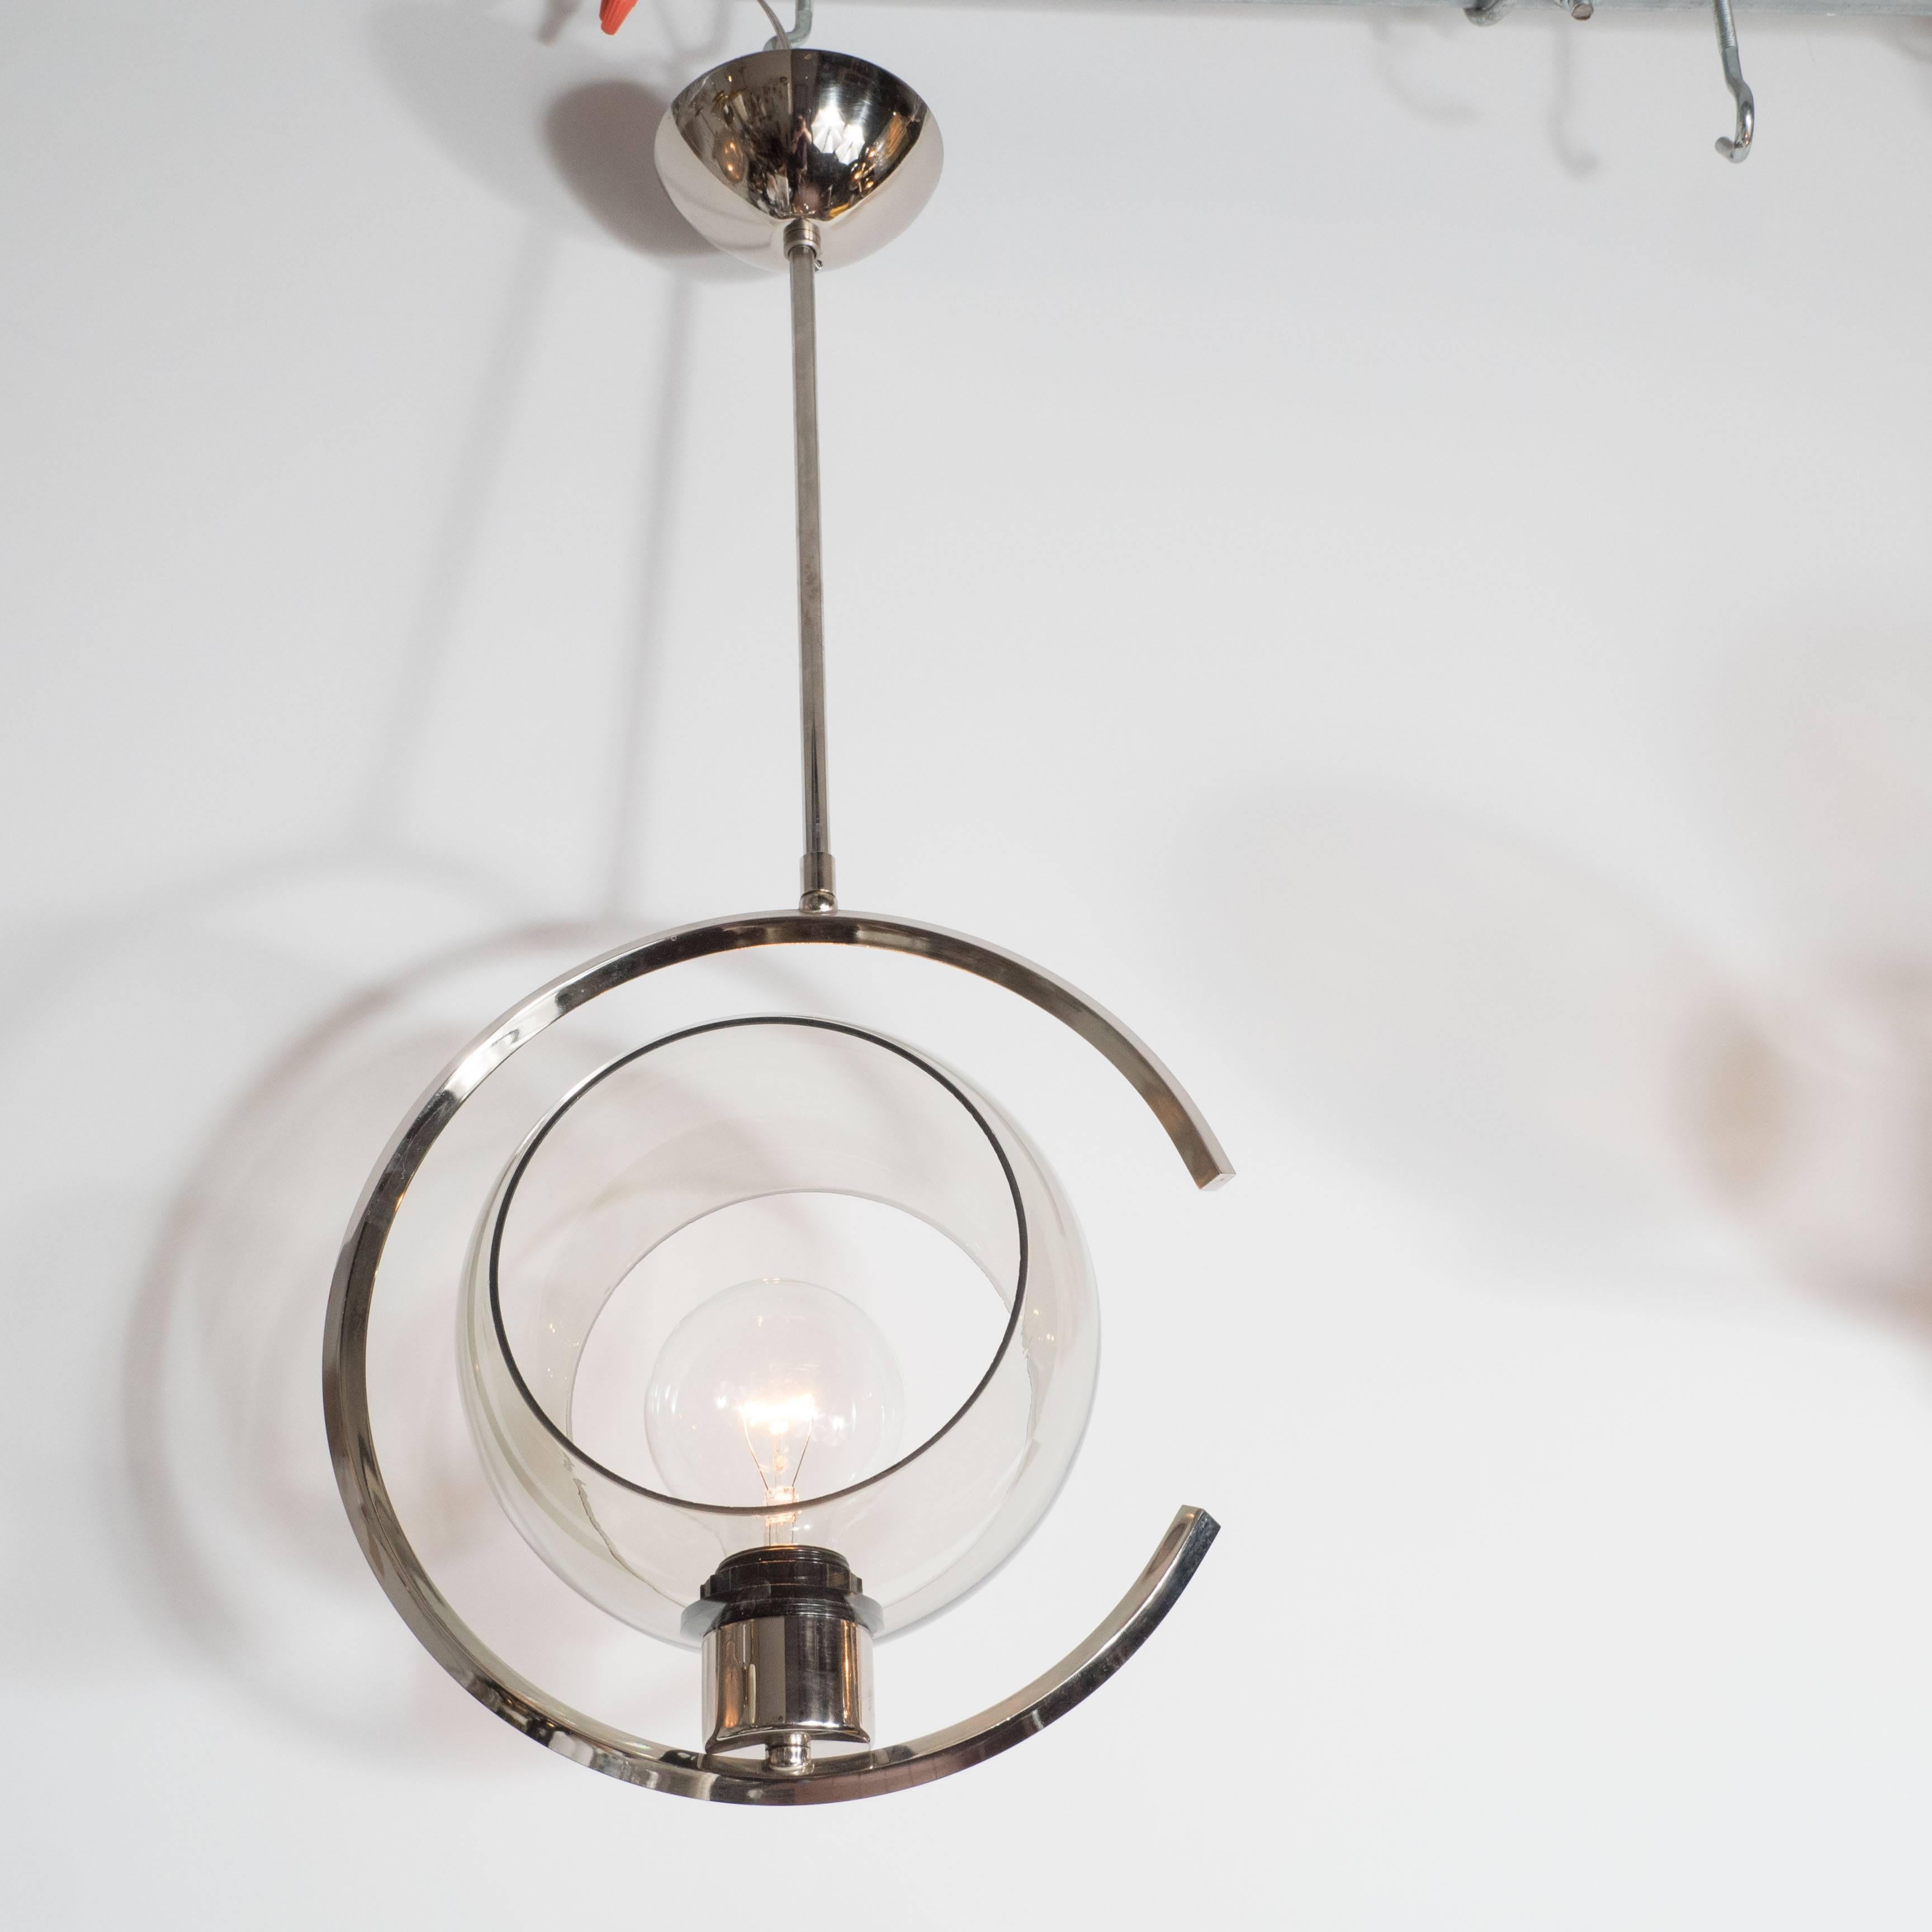 A Mid-Century Modernist concentric design chrome and glass pendant. This chandelier features a tubular chrome rod which supports a C-shape frame, in which rests a single Edison-based socket and circular curved smoked glass shade with exposed sides.